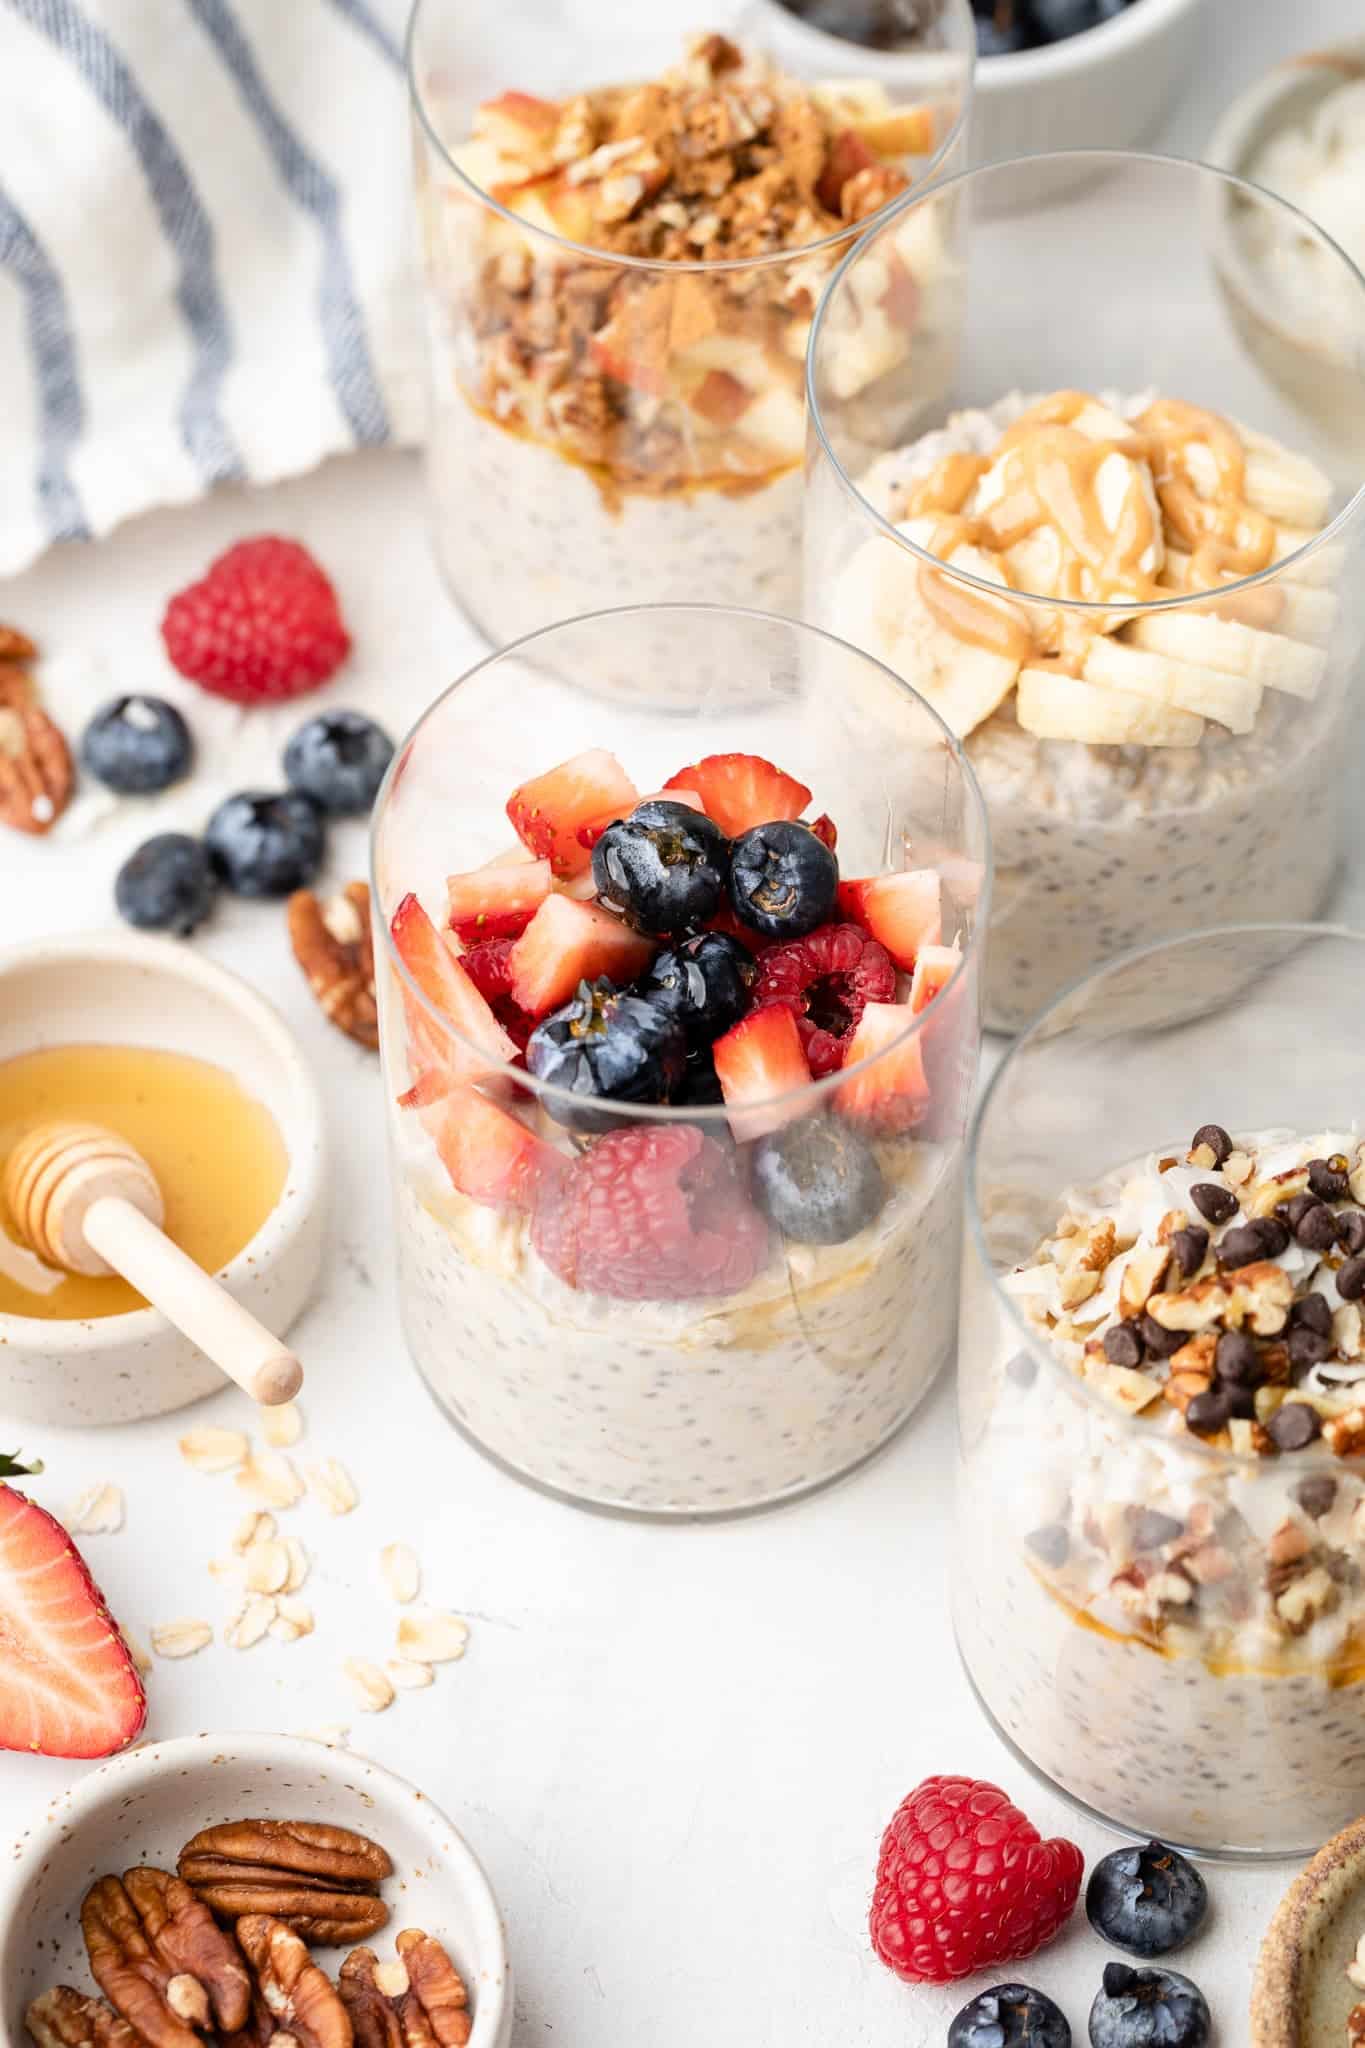 Overnight oats made with coconut milk in 4 different glass jars with different toppings.